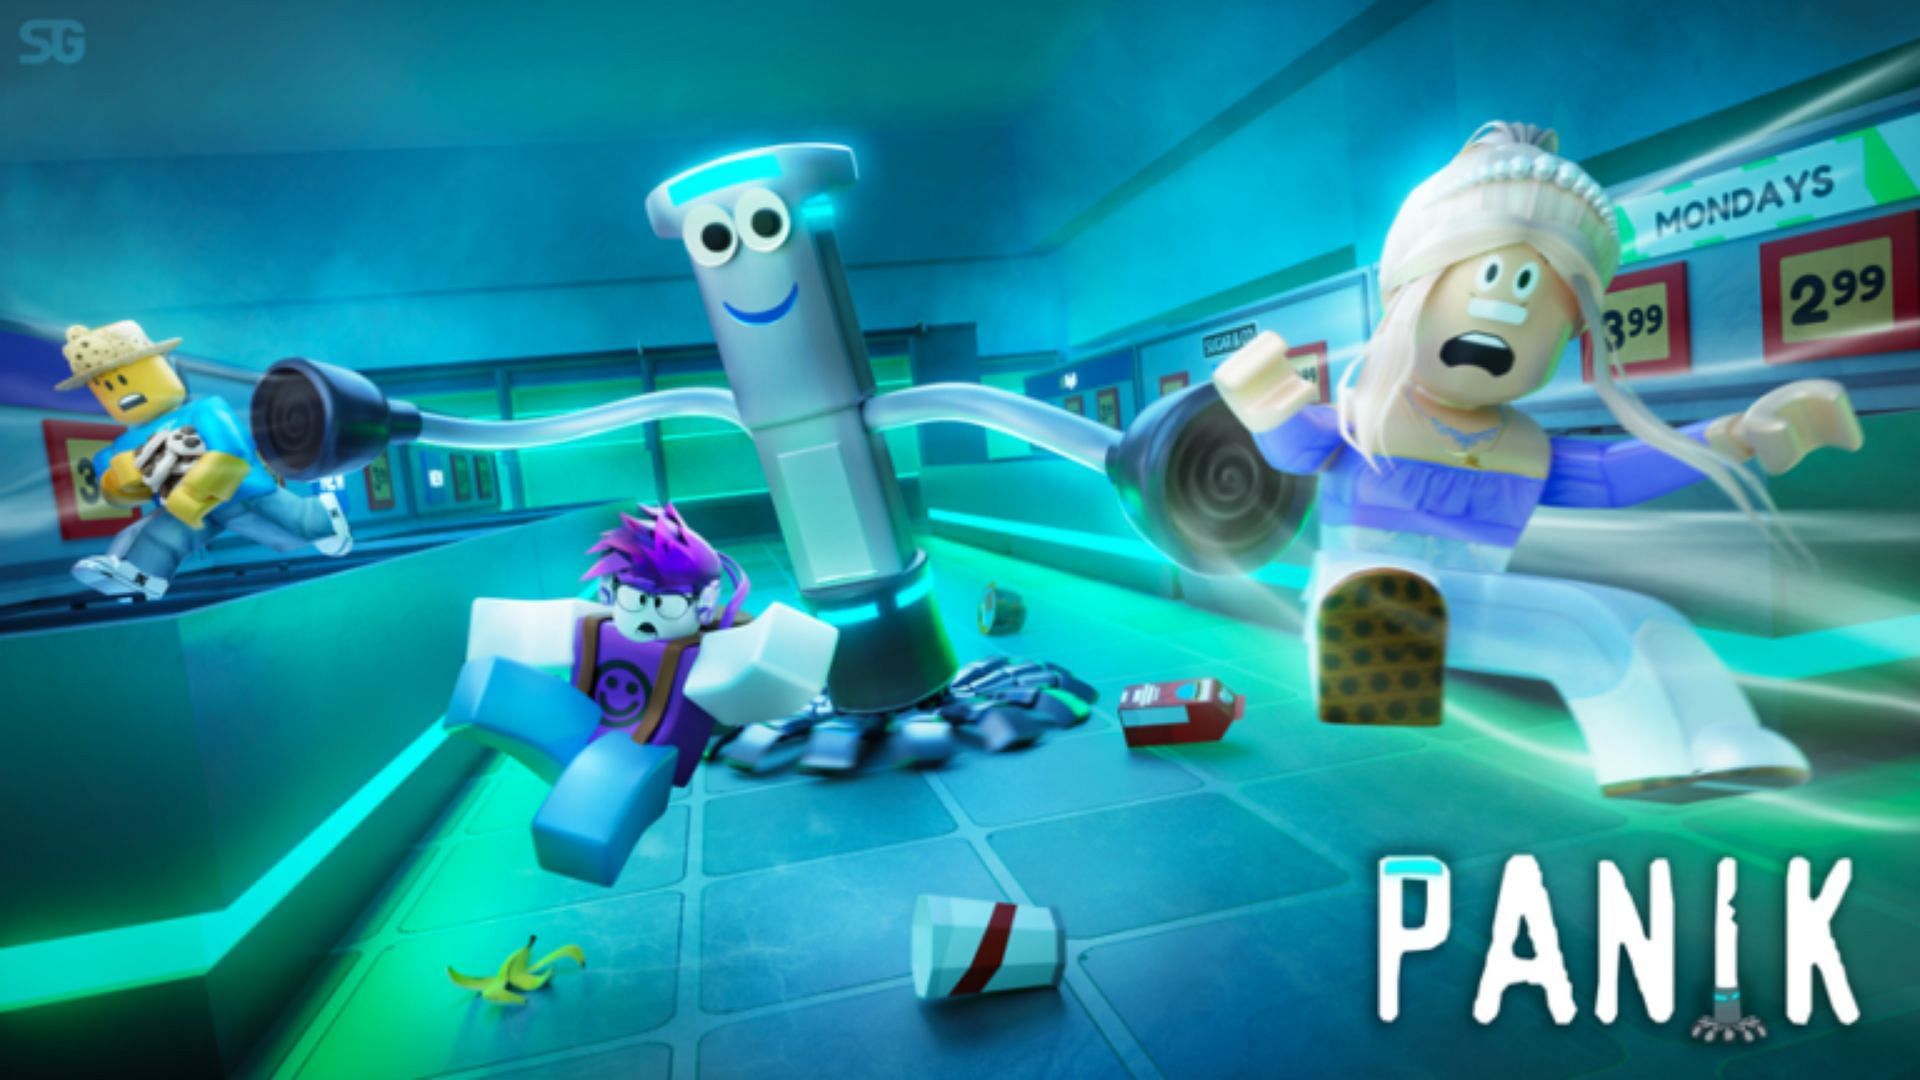 Codes for Panik and their importance (Image via Roblox)